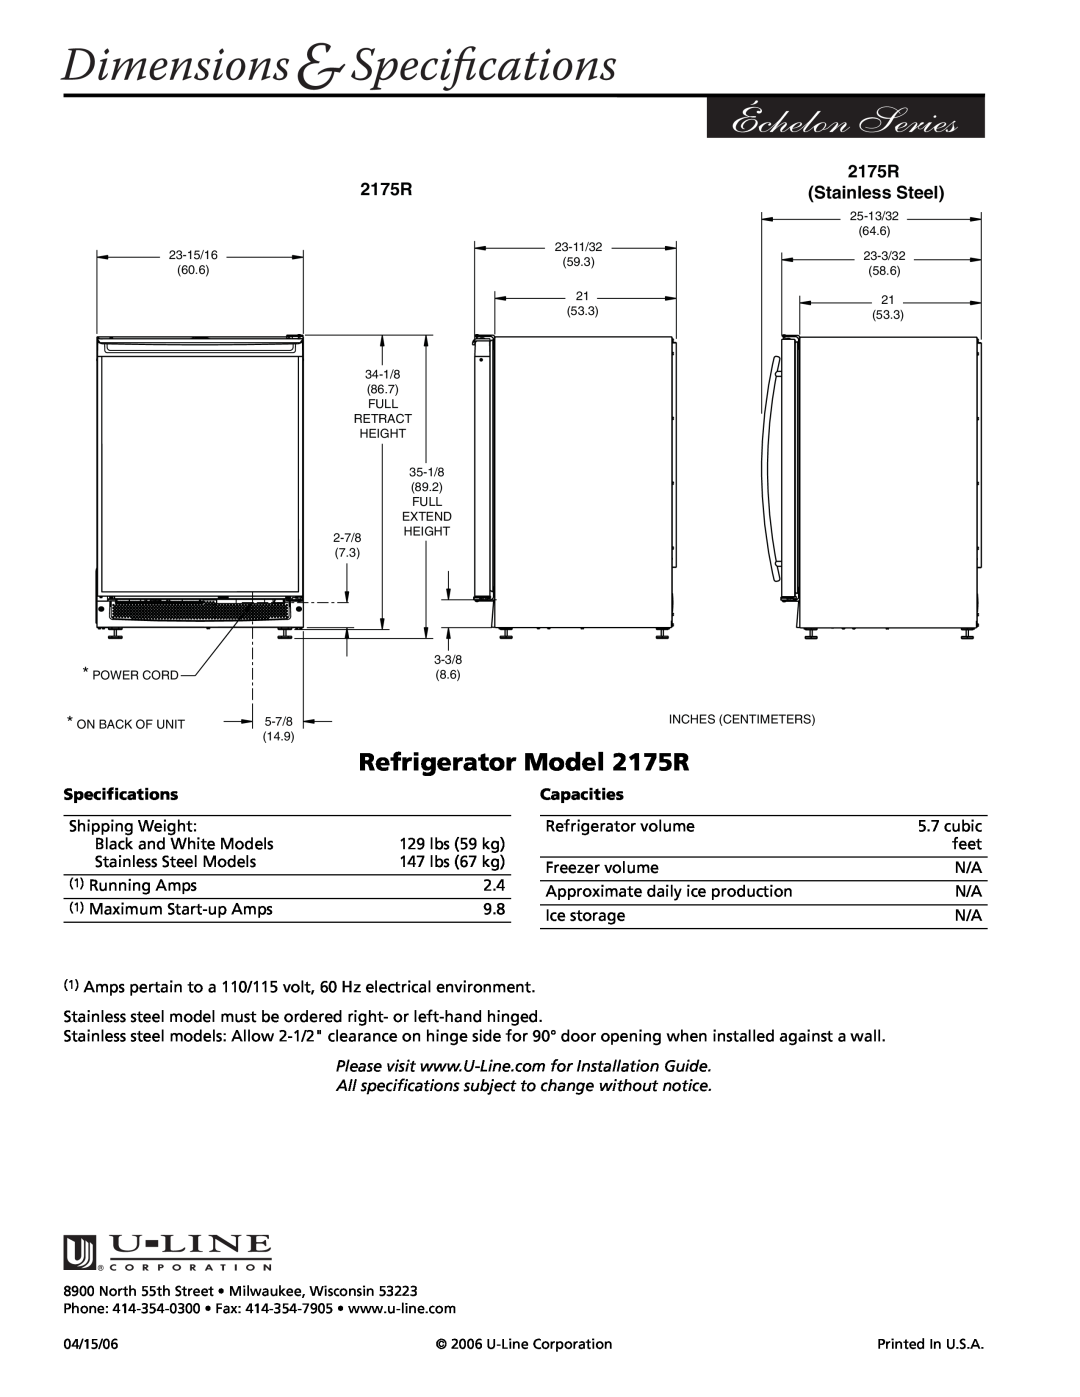 U-Line manual Dimensions &Speciﬁcations, Refrigerator Model 2175R, Stainless Steel, Specifications, Capacities 